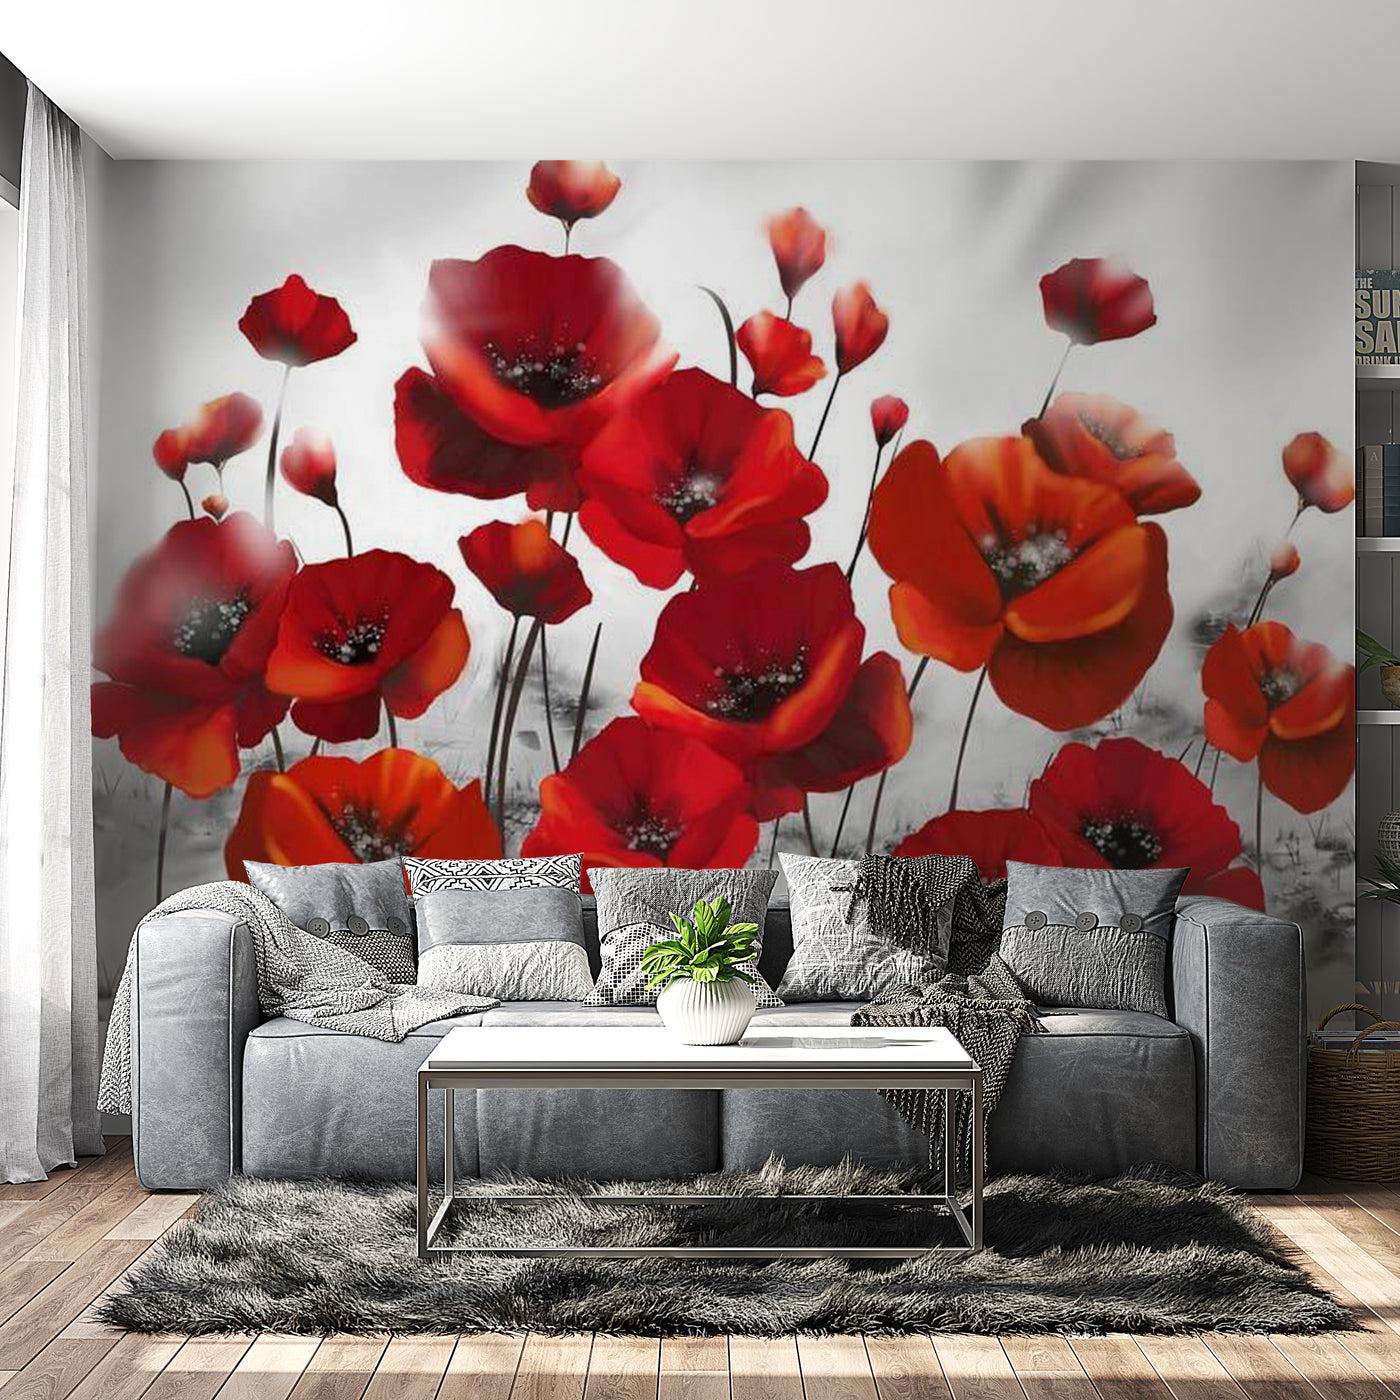 Peel & Stick Floral Wall Mural - Poppies In The Moonlight - Removable Wall Decals